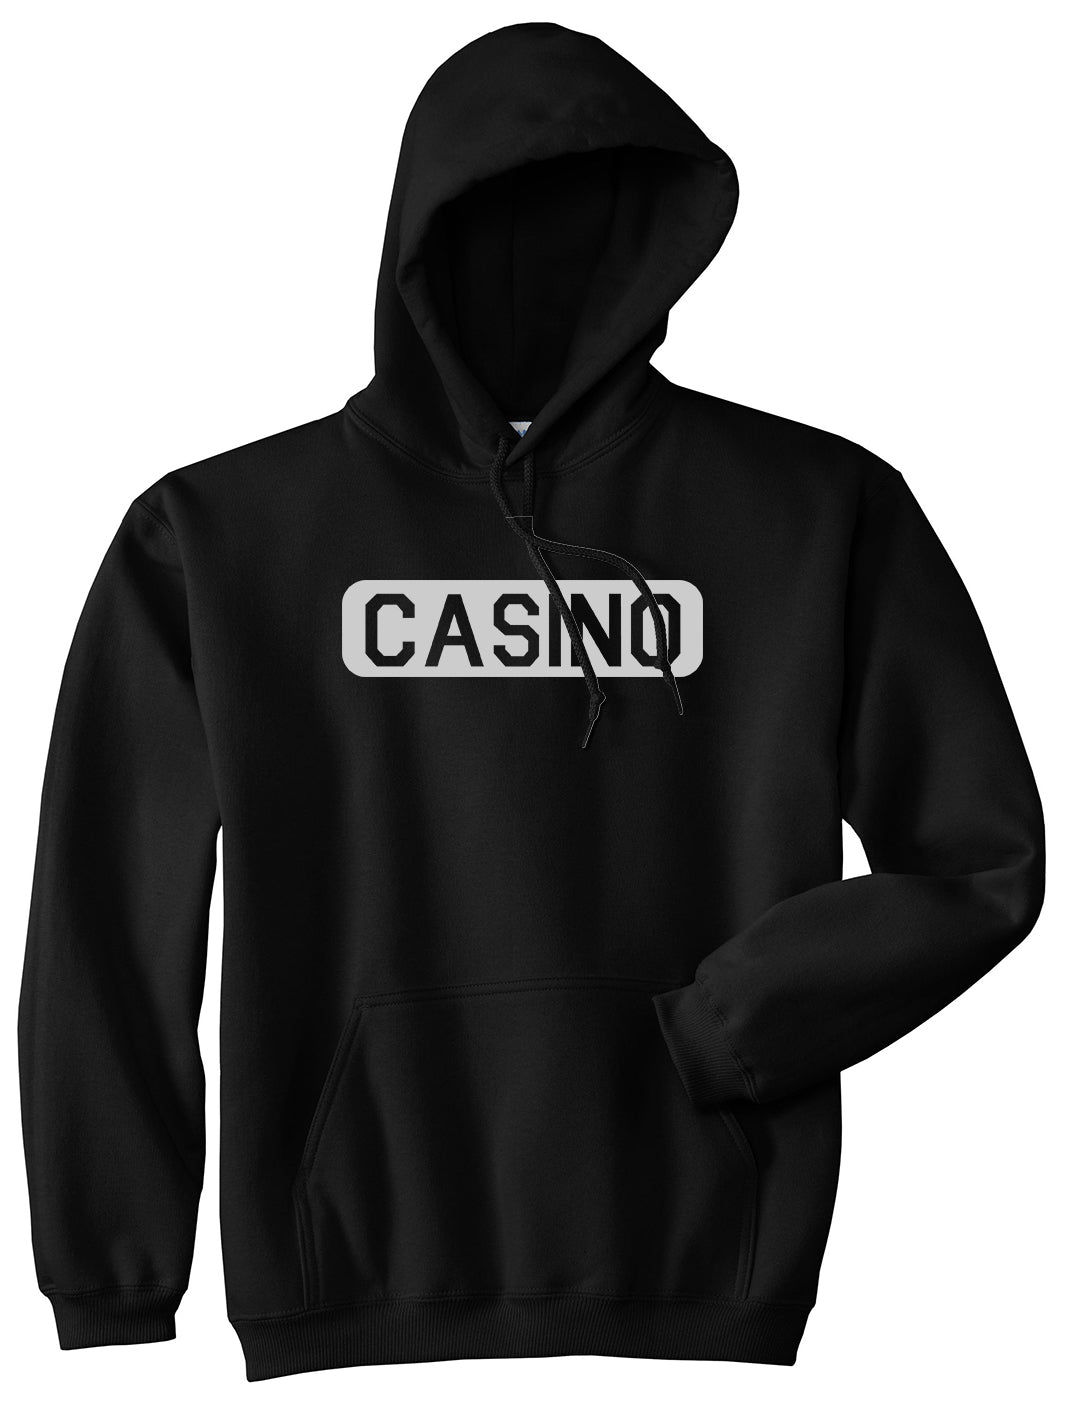 Casino Black Pullover Hoodie by Kings Of NY